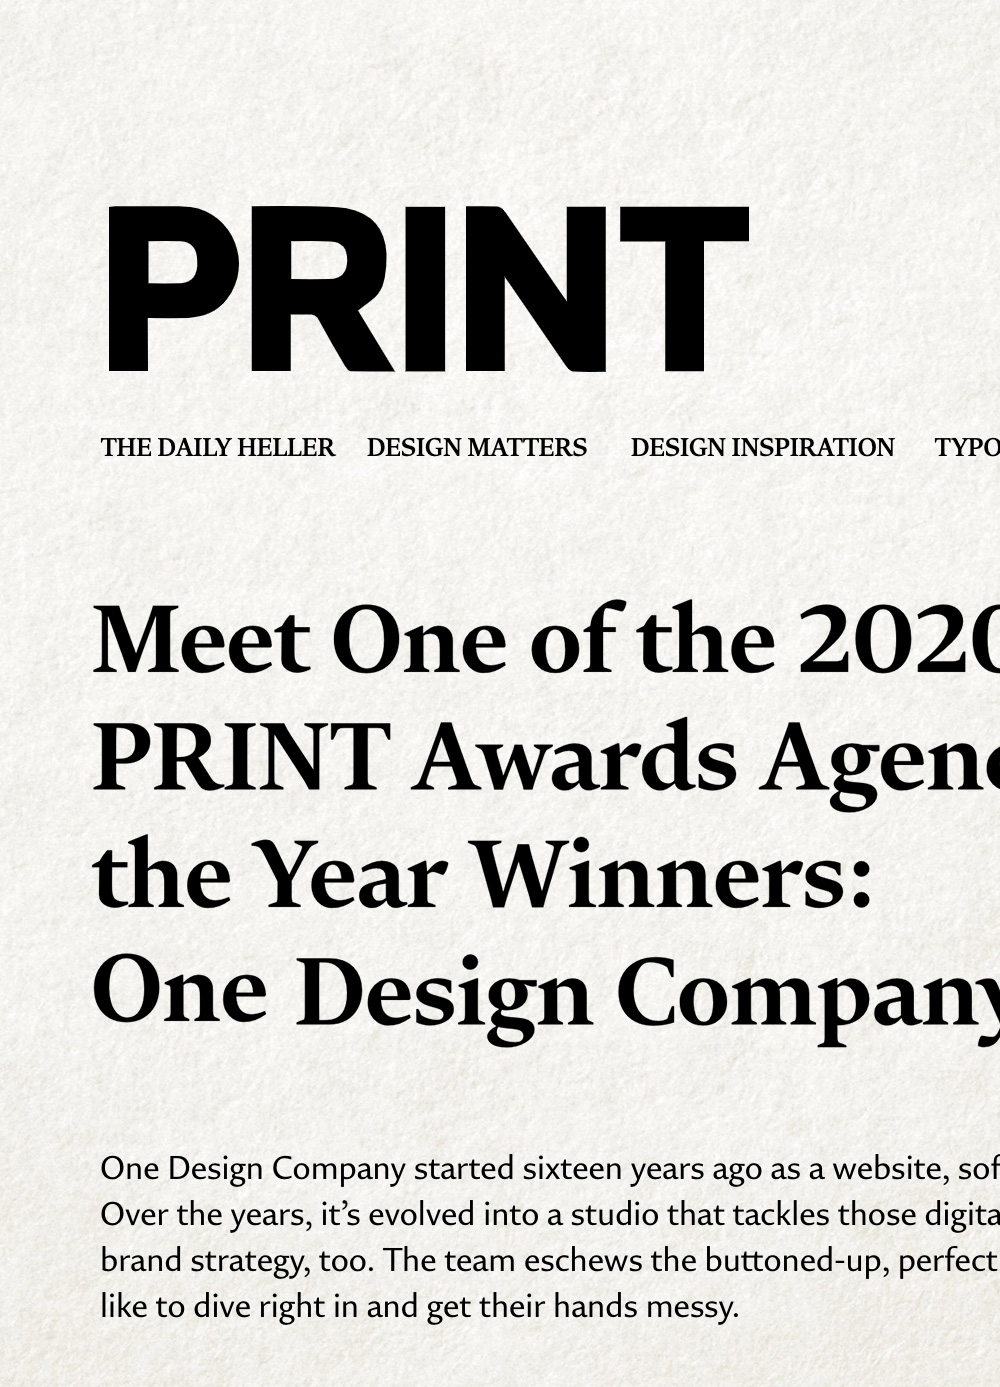 PRINT Agency of the Year 2020